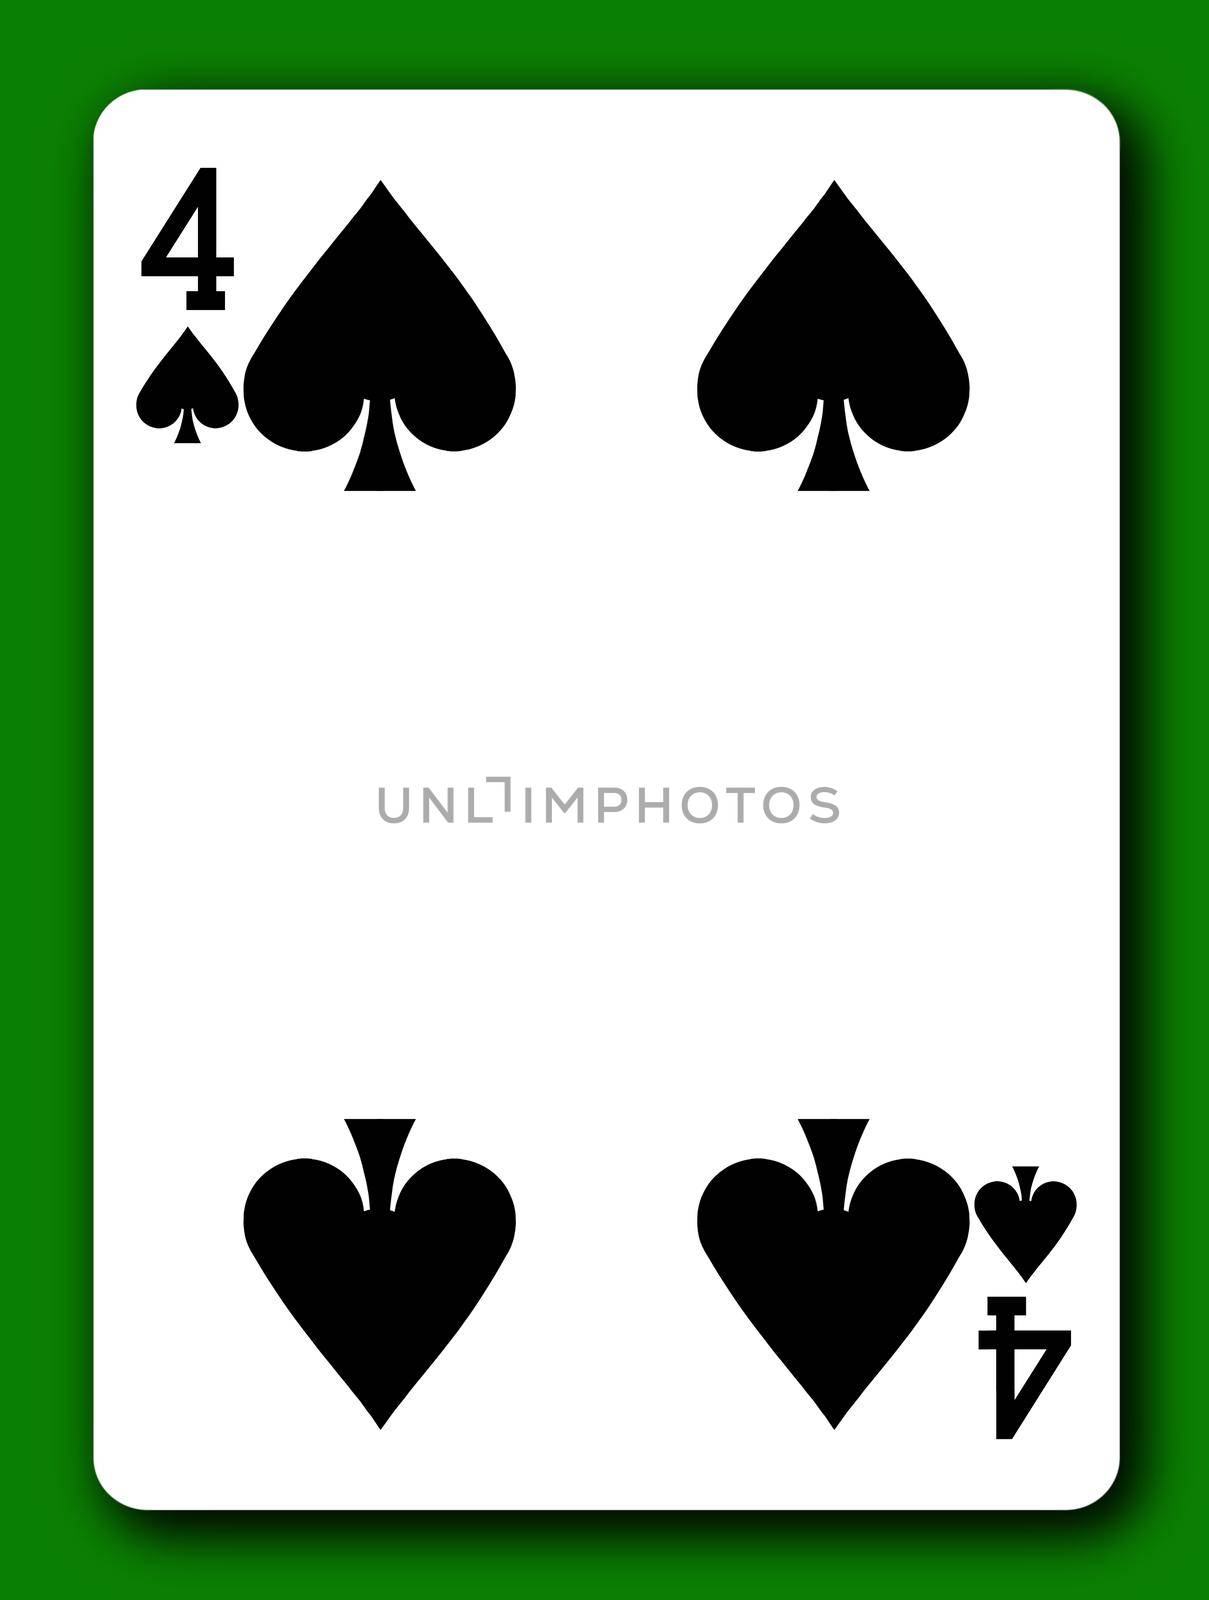 A 4 Four of Spades playing card with clipping path to remove background and shadow 3d illustration